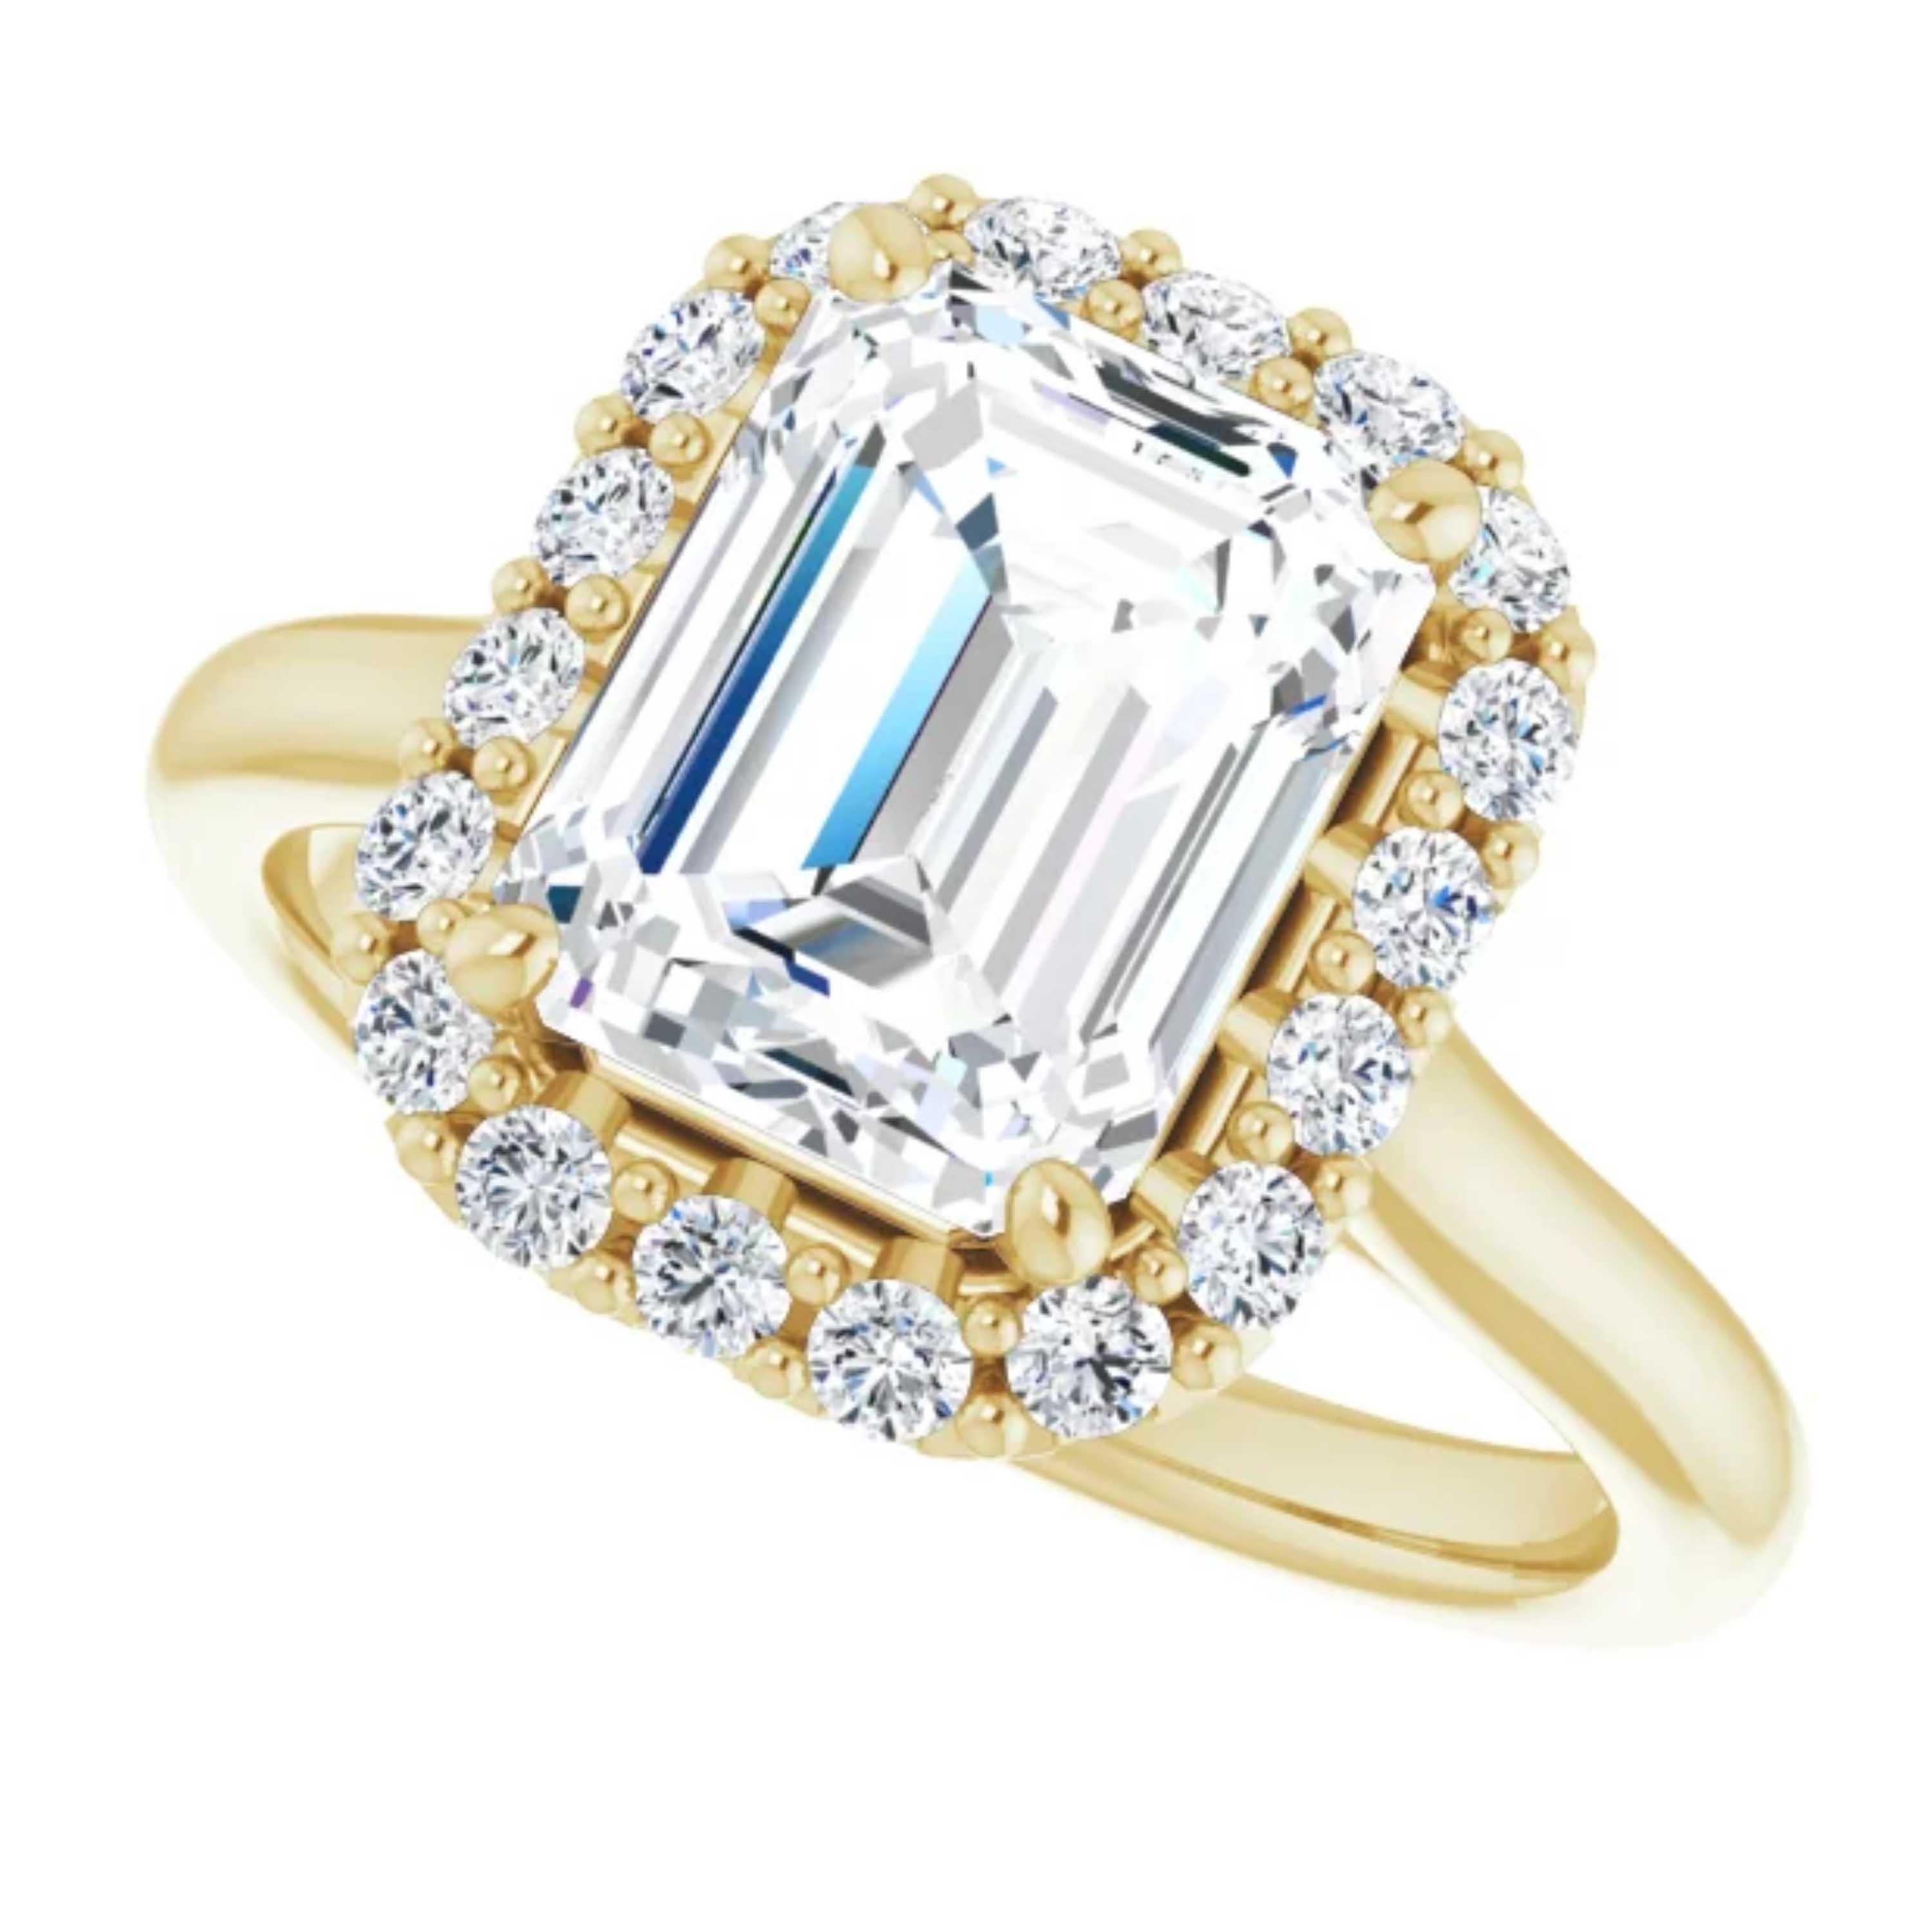 Women's Halo Emerald Cut Diamond Engagement Ring Yellow Gold For Sale